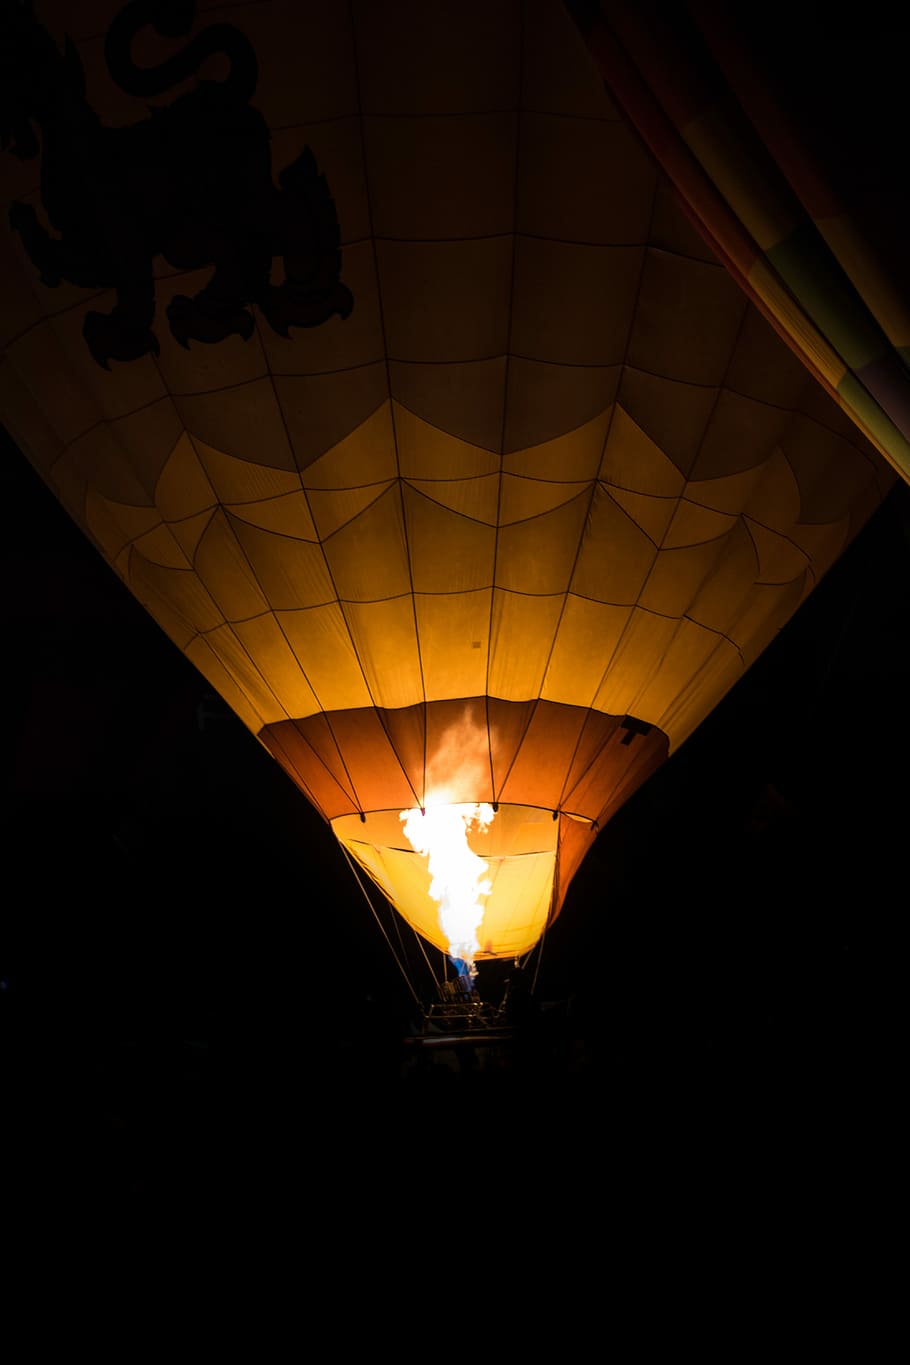 lighted hot air balloon during night time, brown hot air balloon with black background